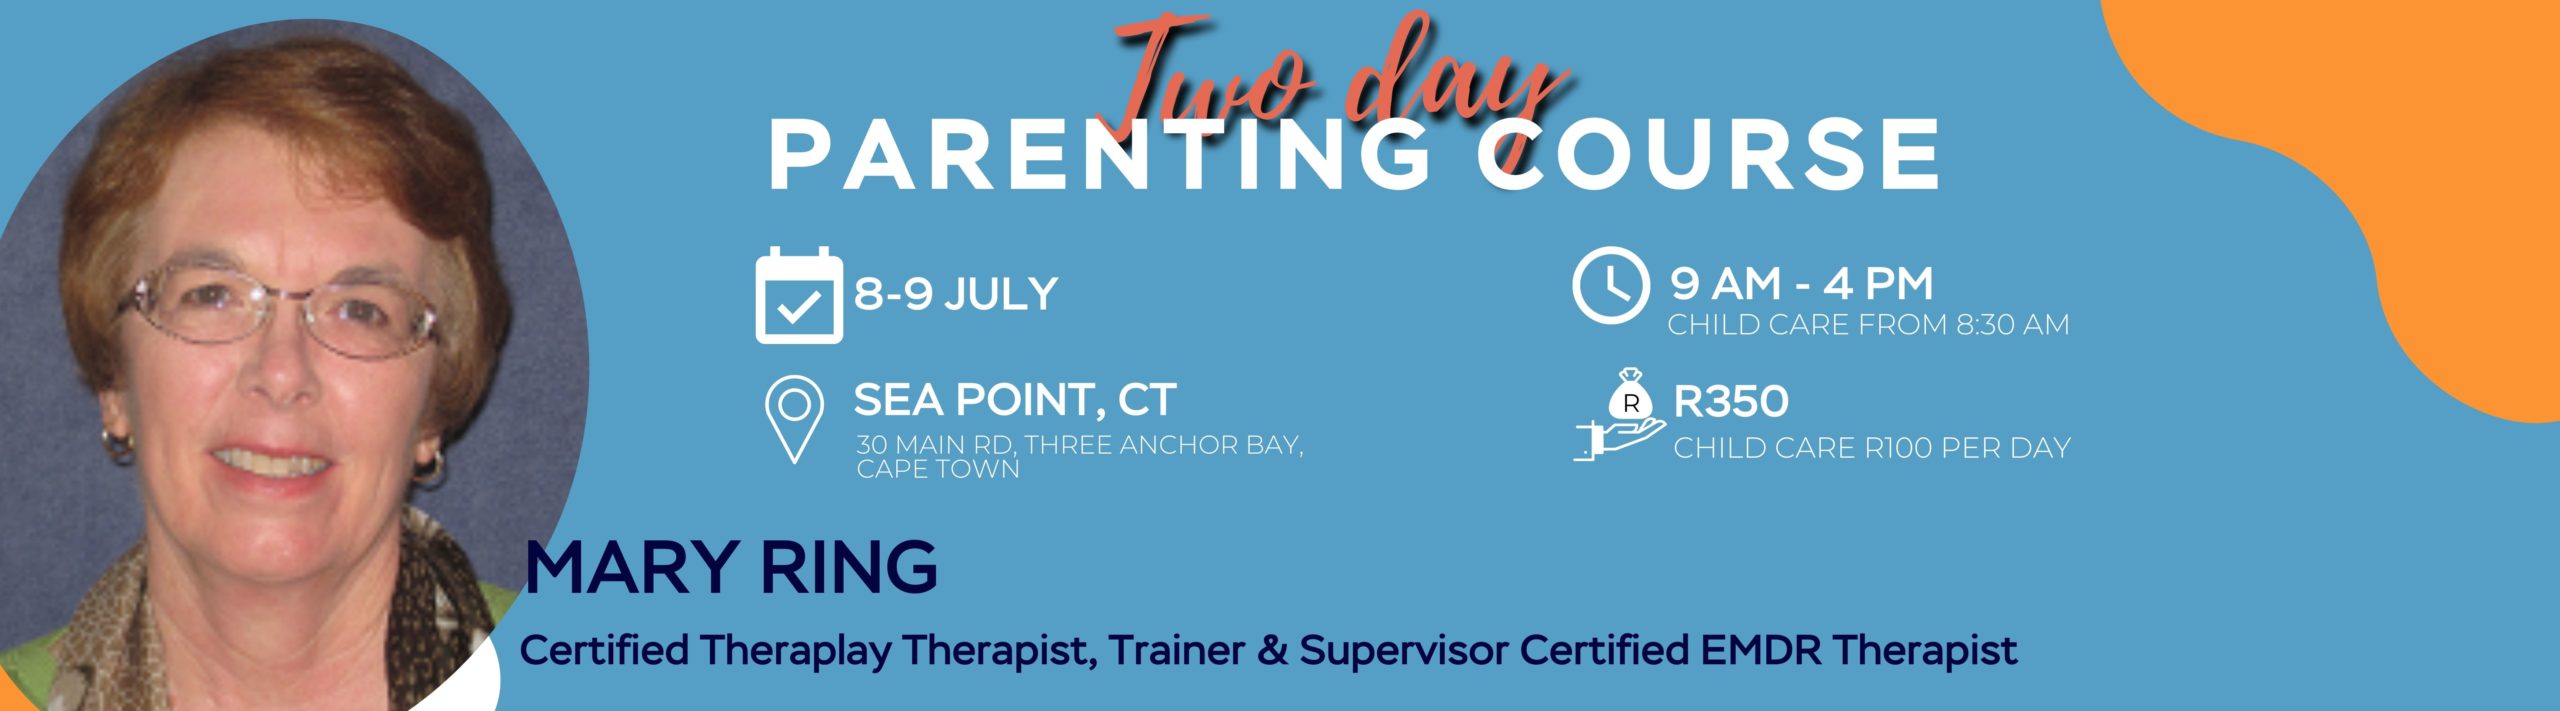 Mary Ring parenting course in Cape Town